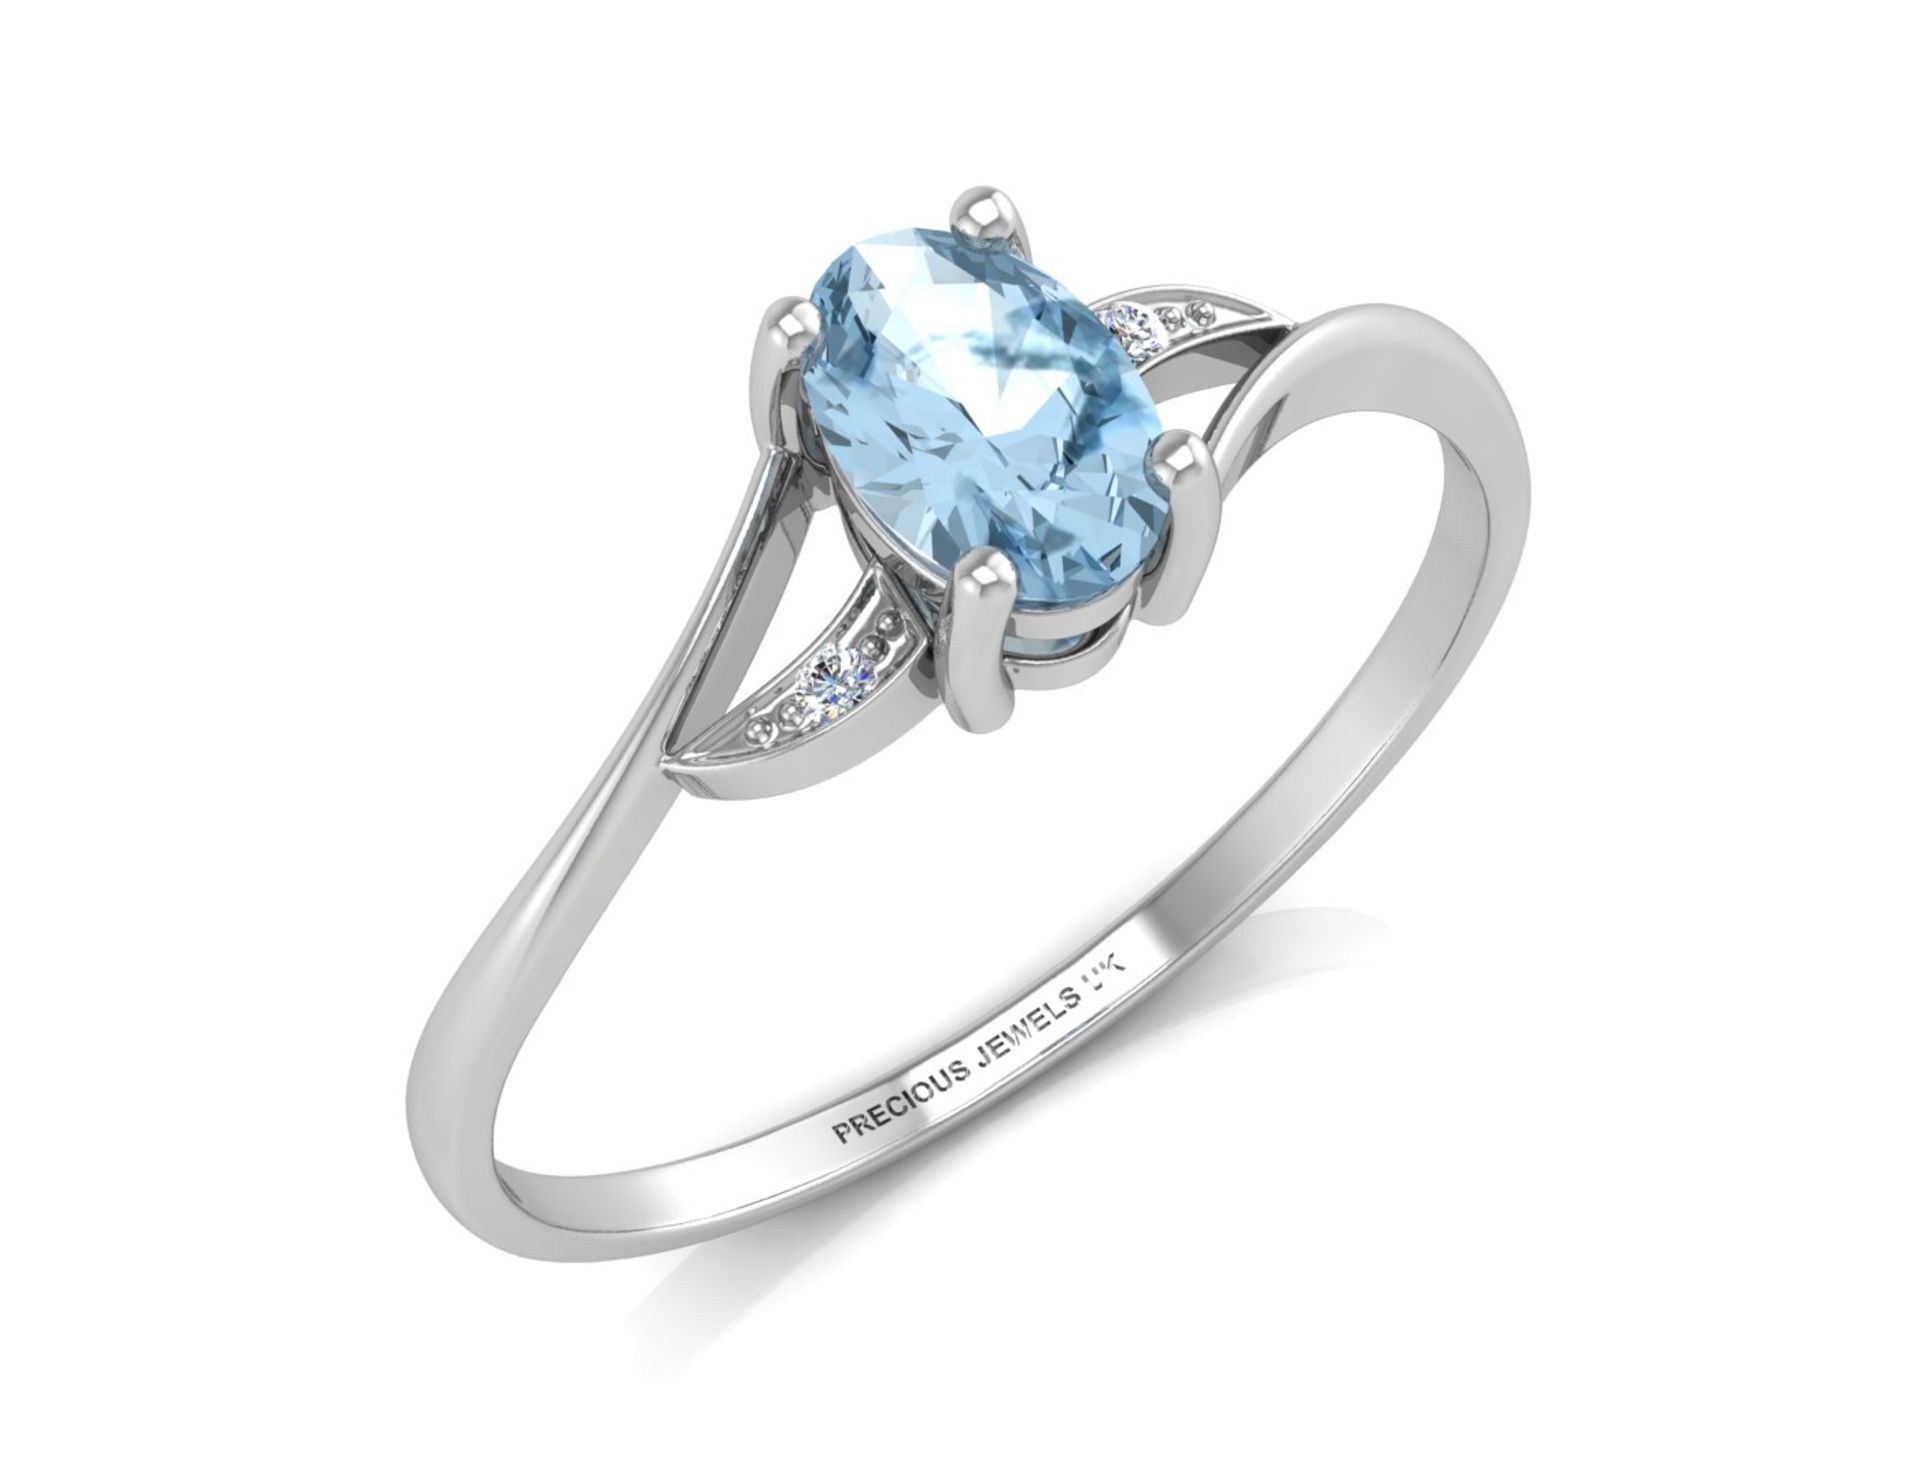 9ct White Gold Diamond And Blue Topaz Ring 0.01 Carats - Valued by AGI £625.00 - 9ct White Gold